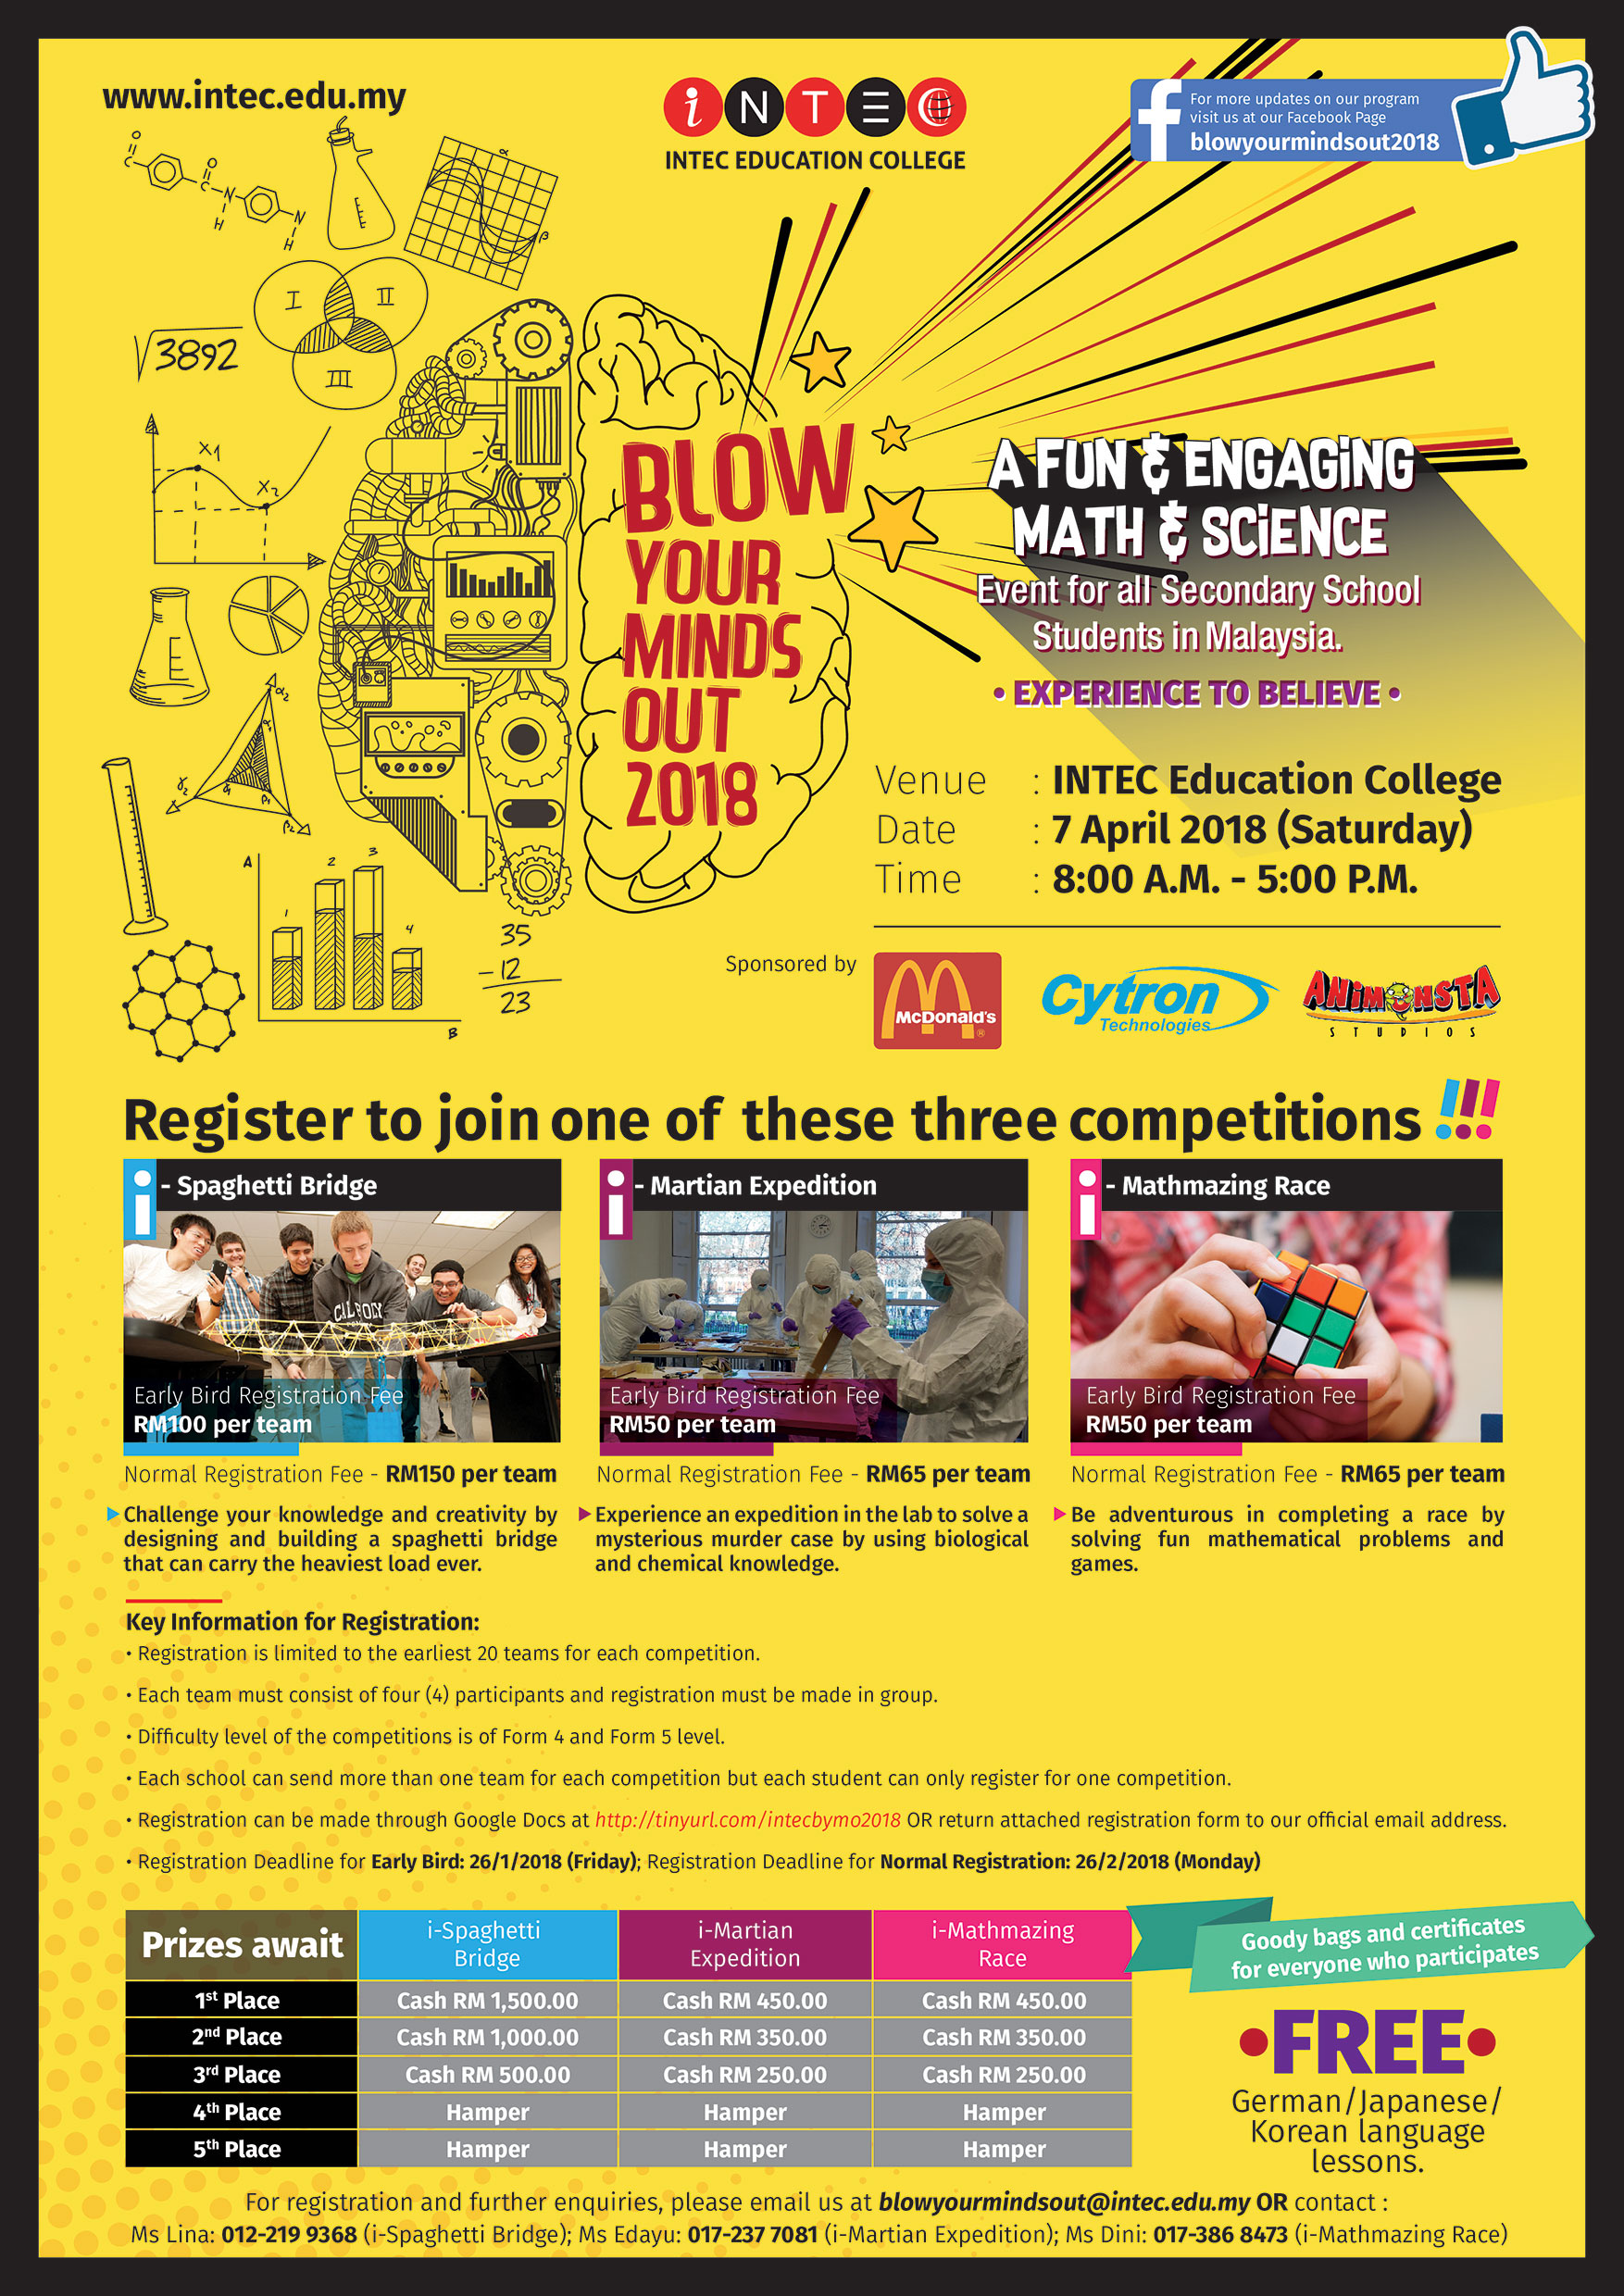 intec education college blow your minds out 2018 event